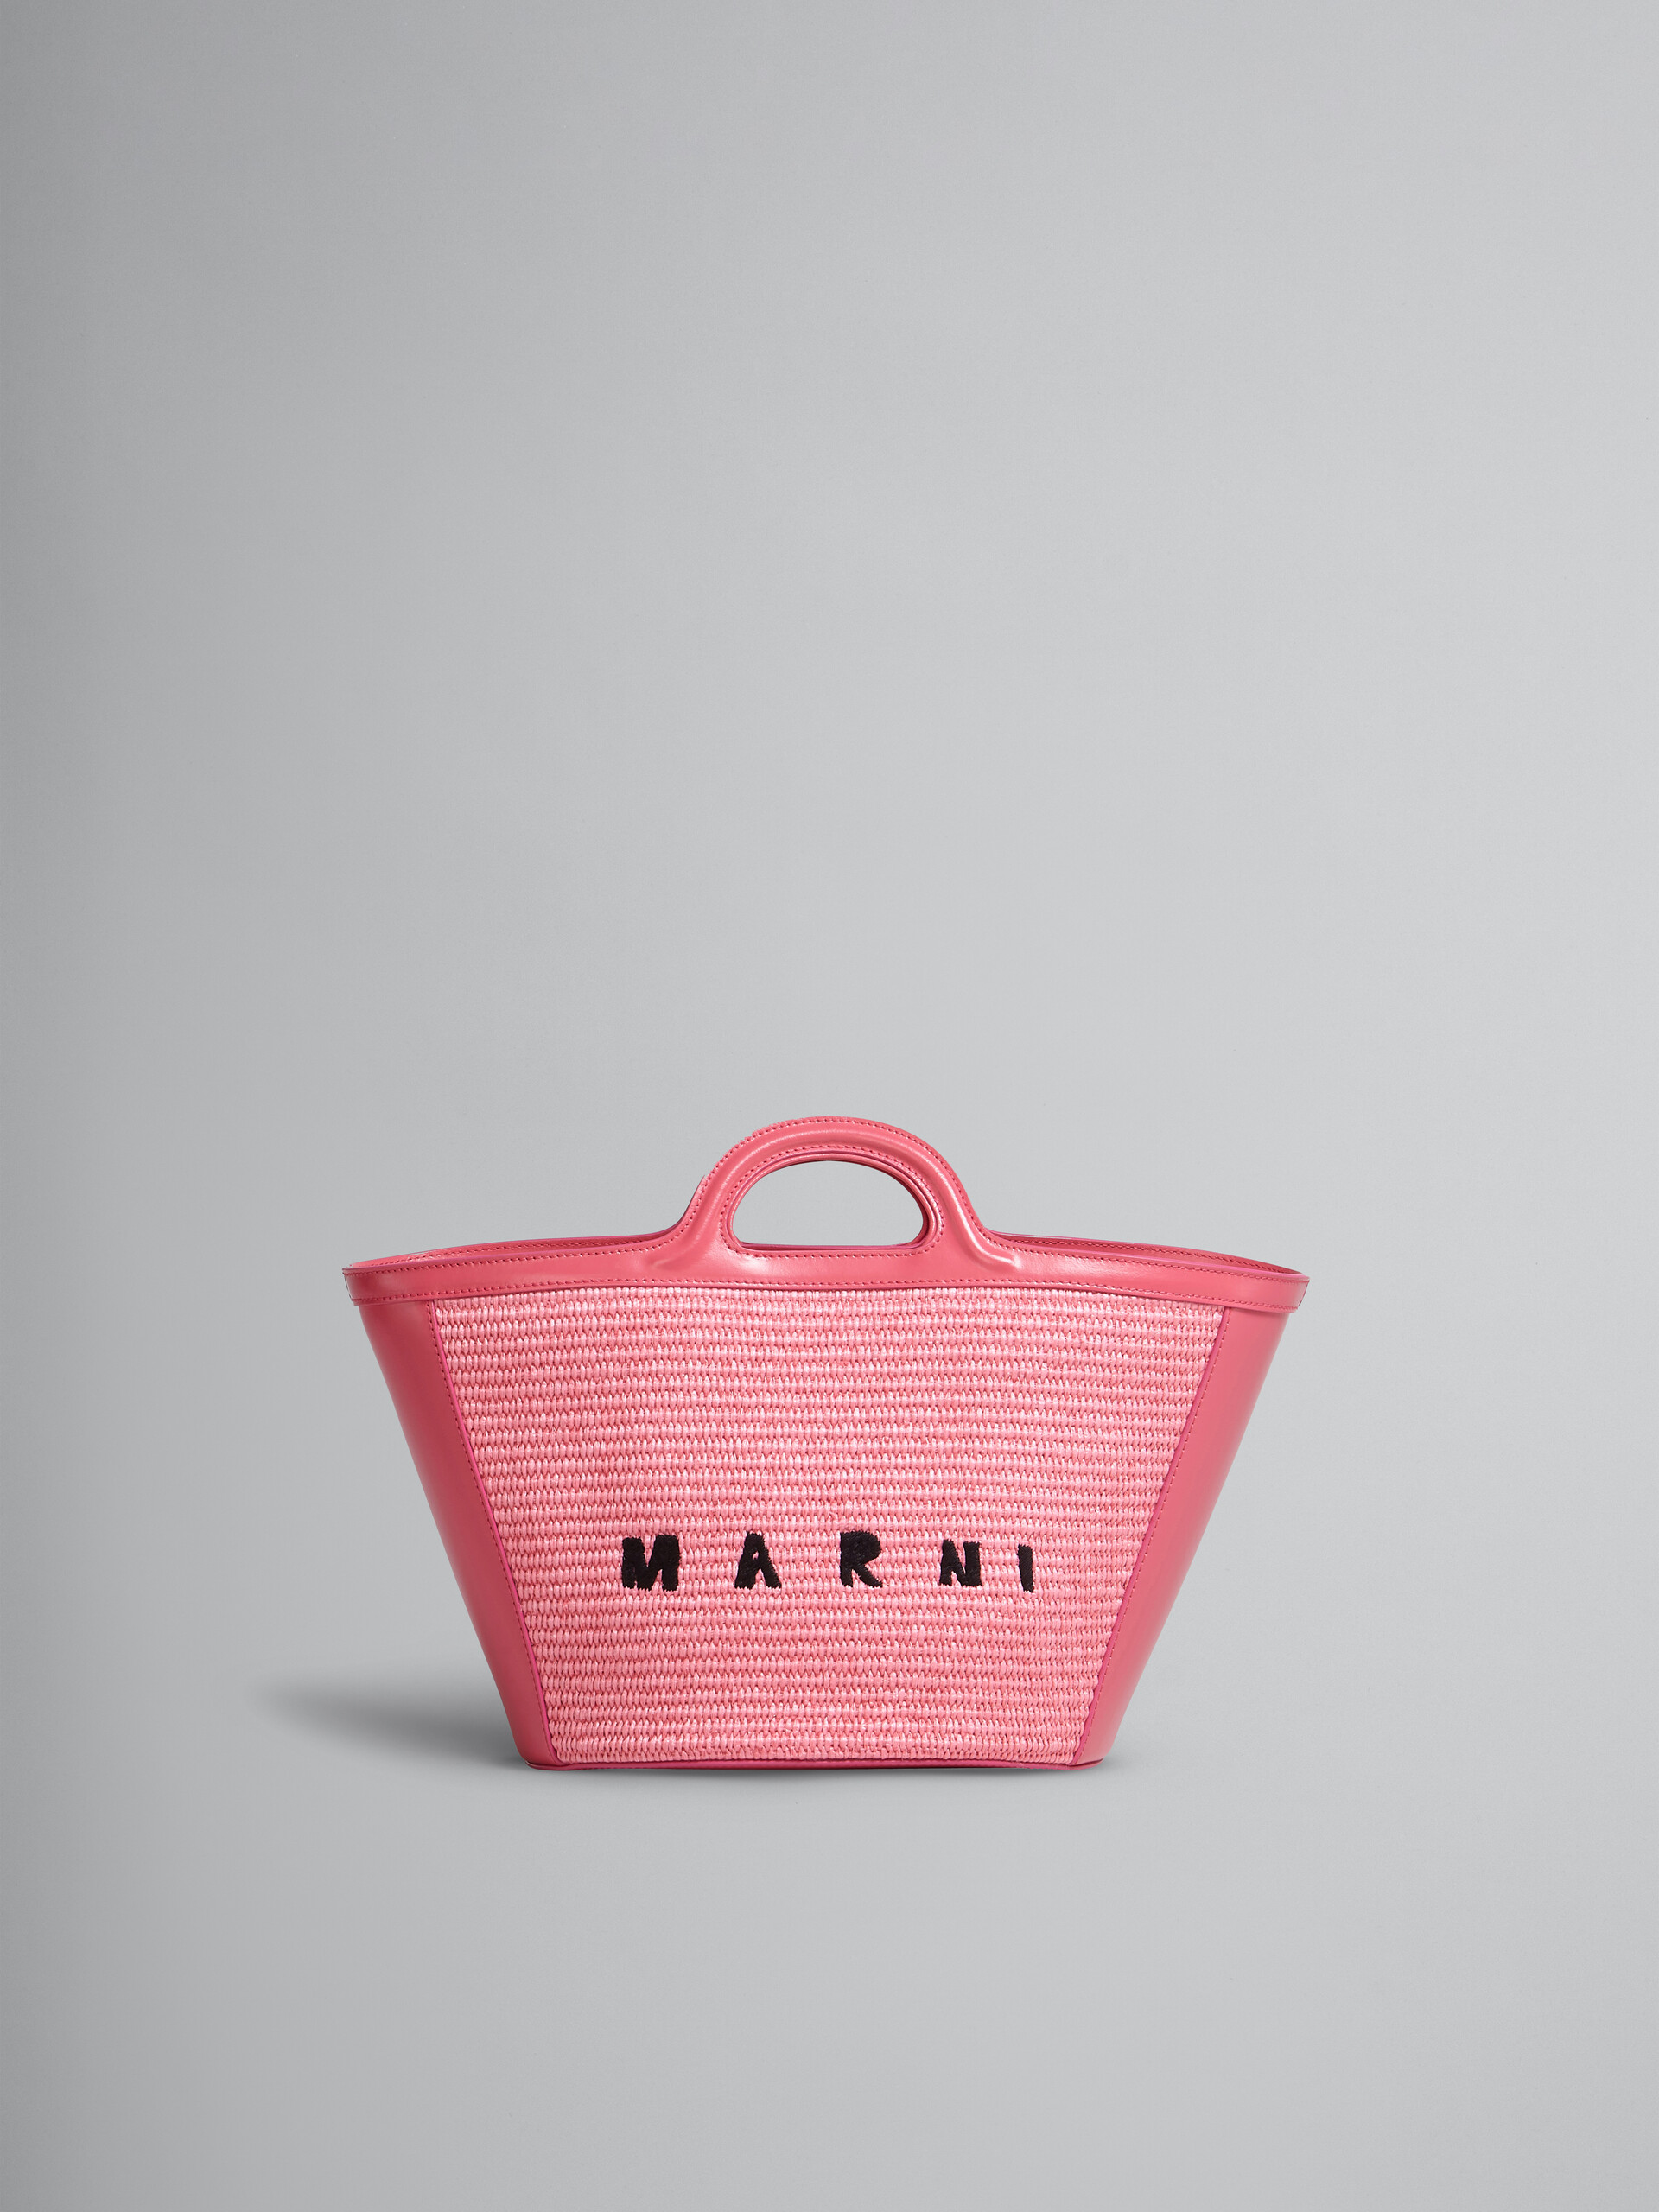 TROPICALIA small bag in pink leather and raffia - Handbags - Image 1